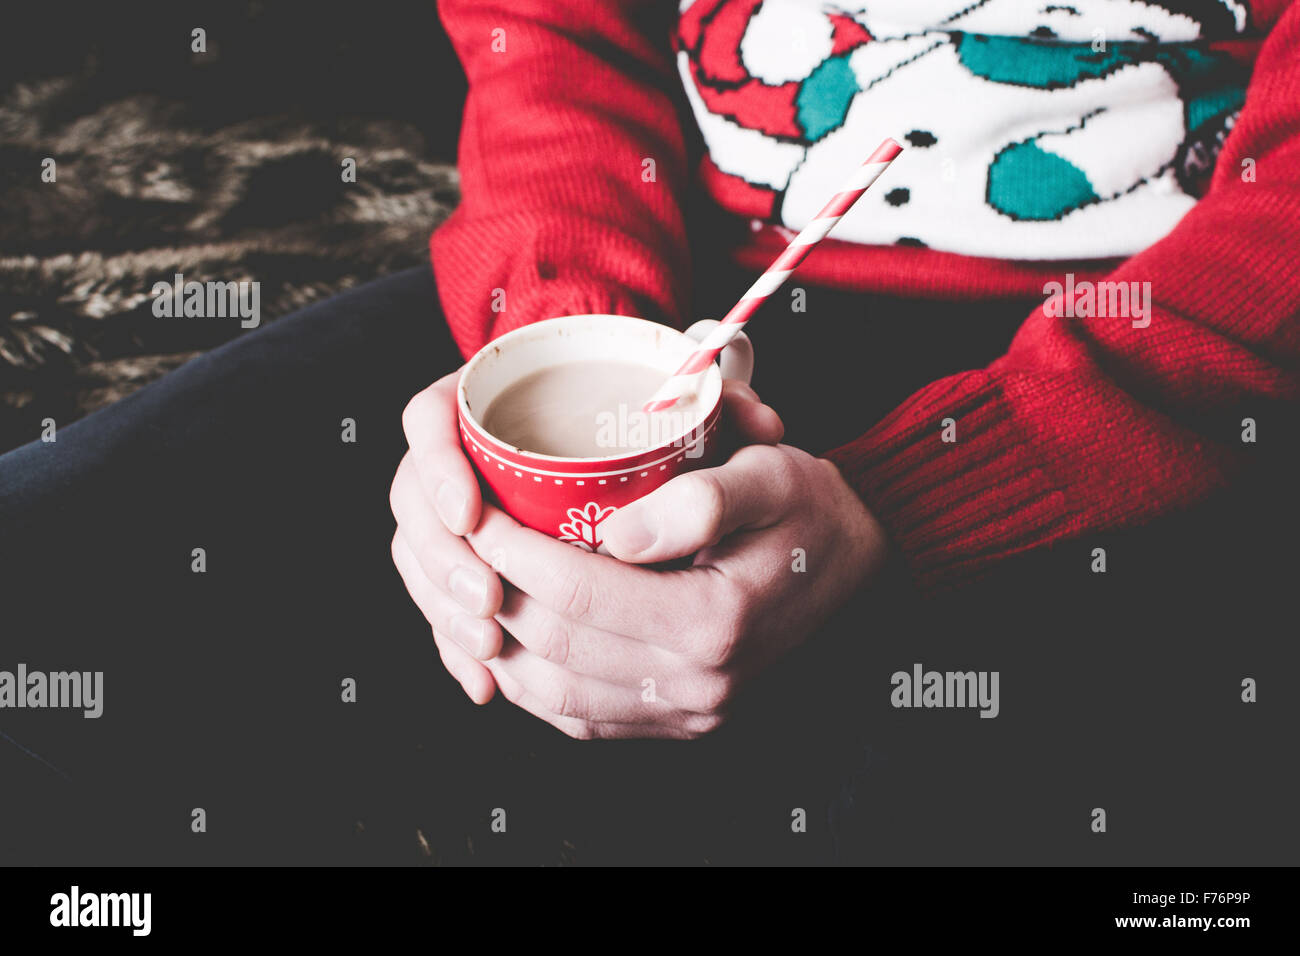 Man wearing a Christmas jumper and holding a hot chocolate Stock Photo